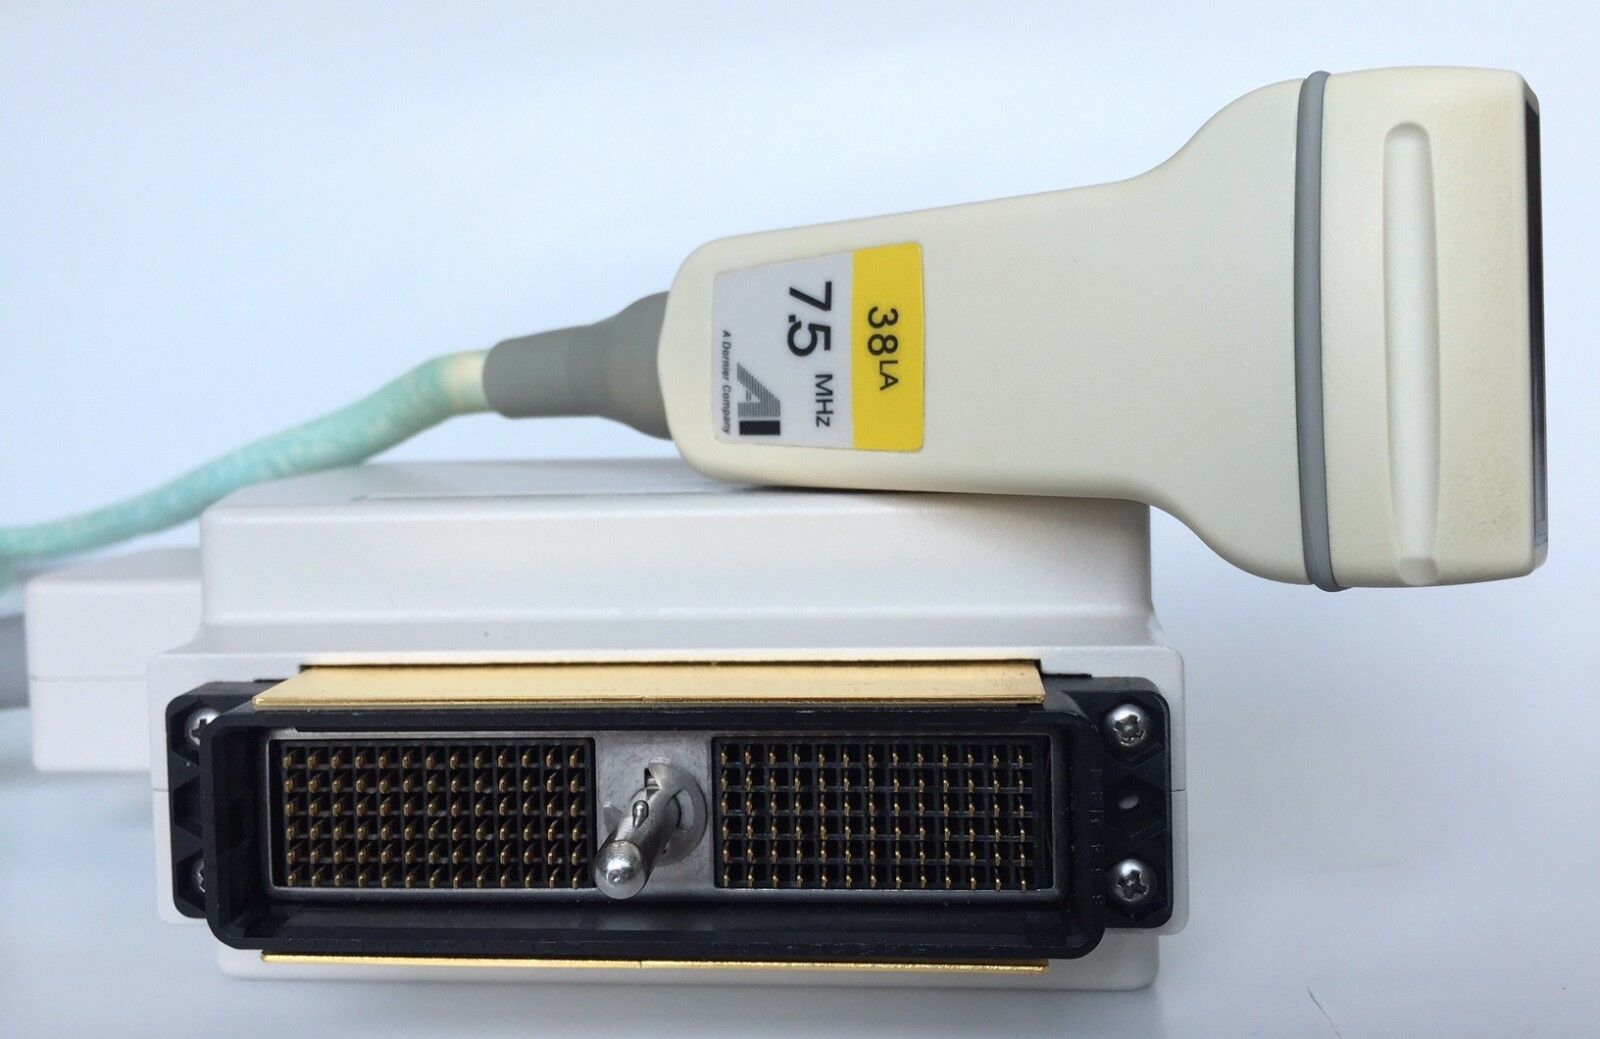 ACOUSTIC IMAGING 38LA 7.5 MHz.ULTRASOUND TRANSDUCER PROBE Used ~ full-tested DIAGNOSTIC ULTRASOUND MACHINES FOR SALE